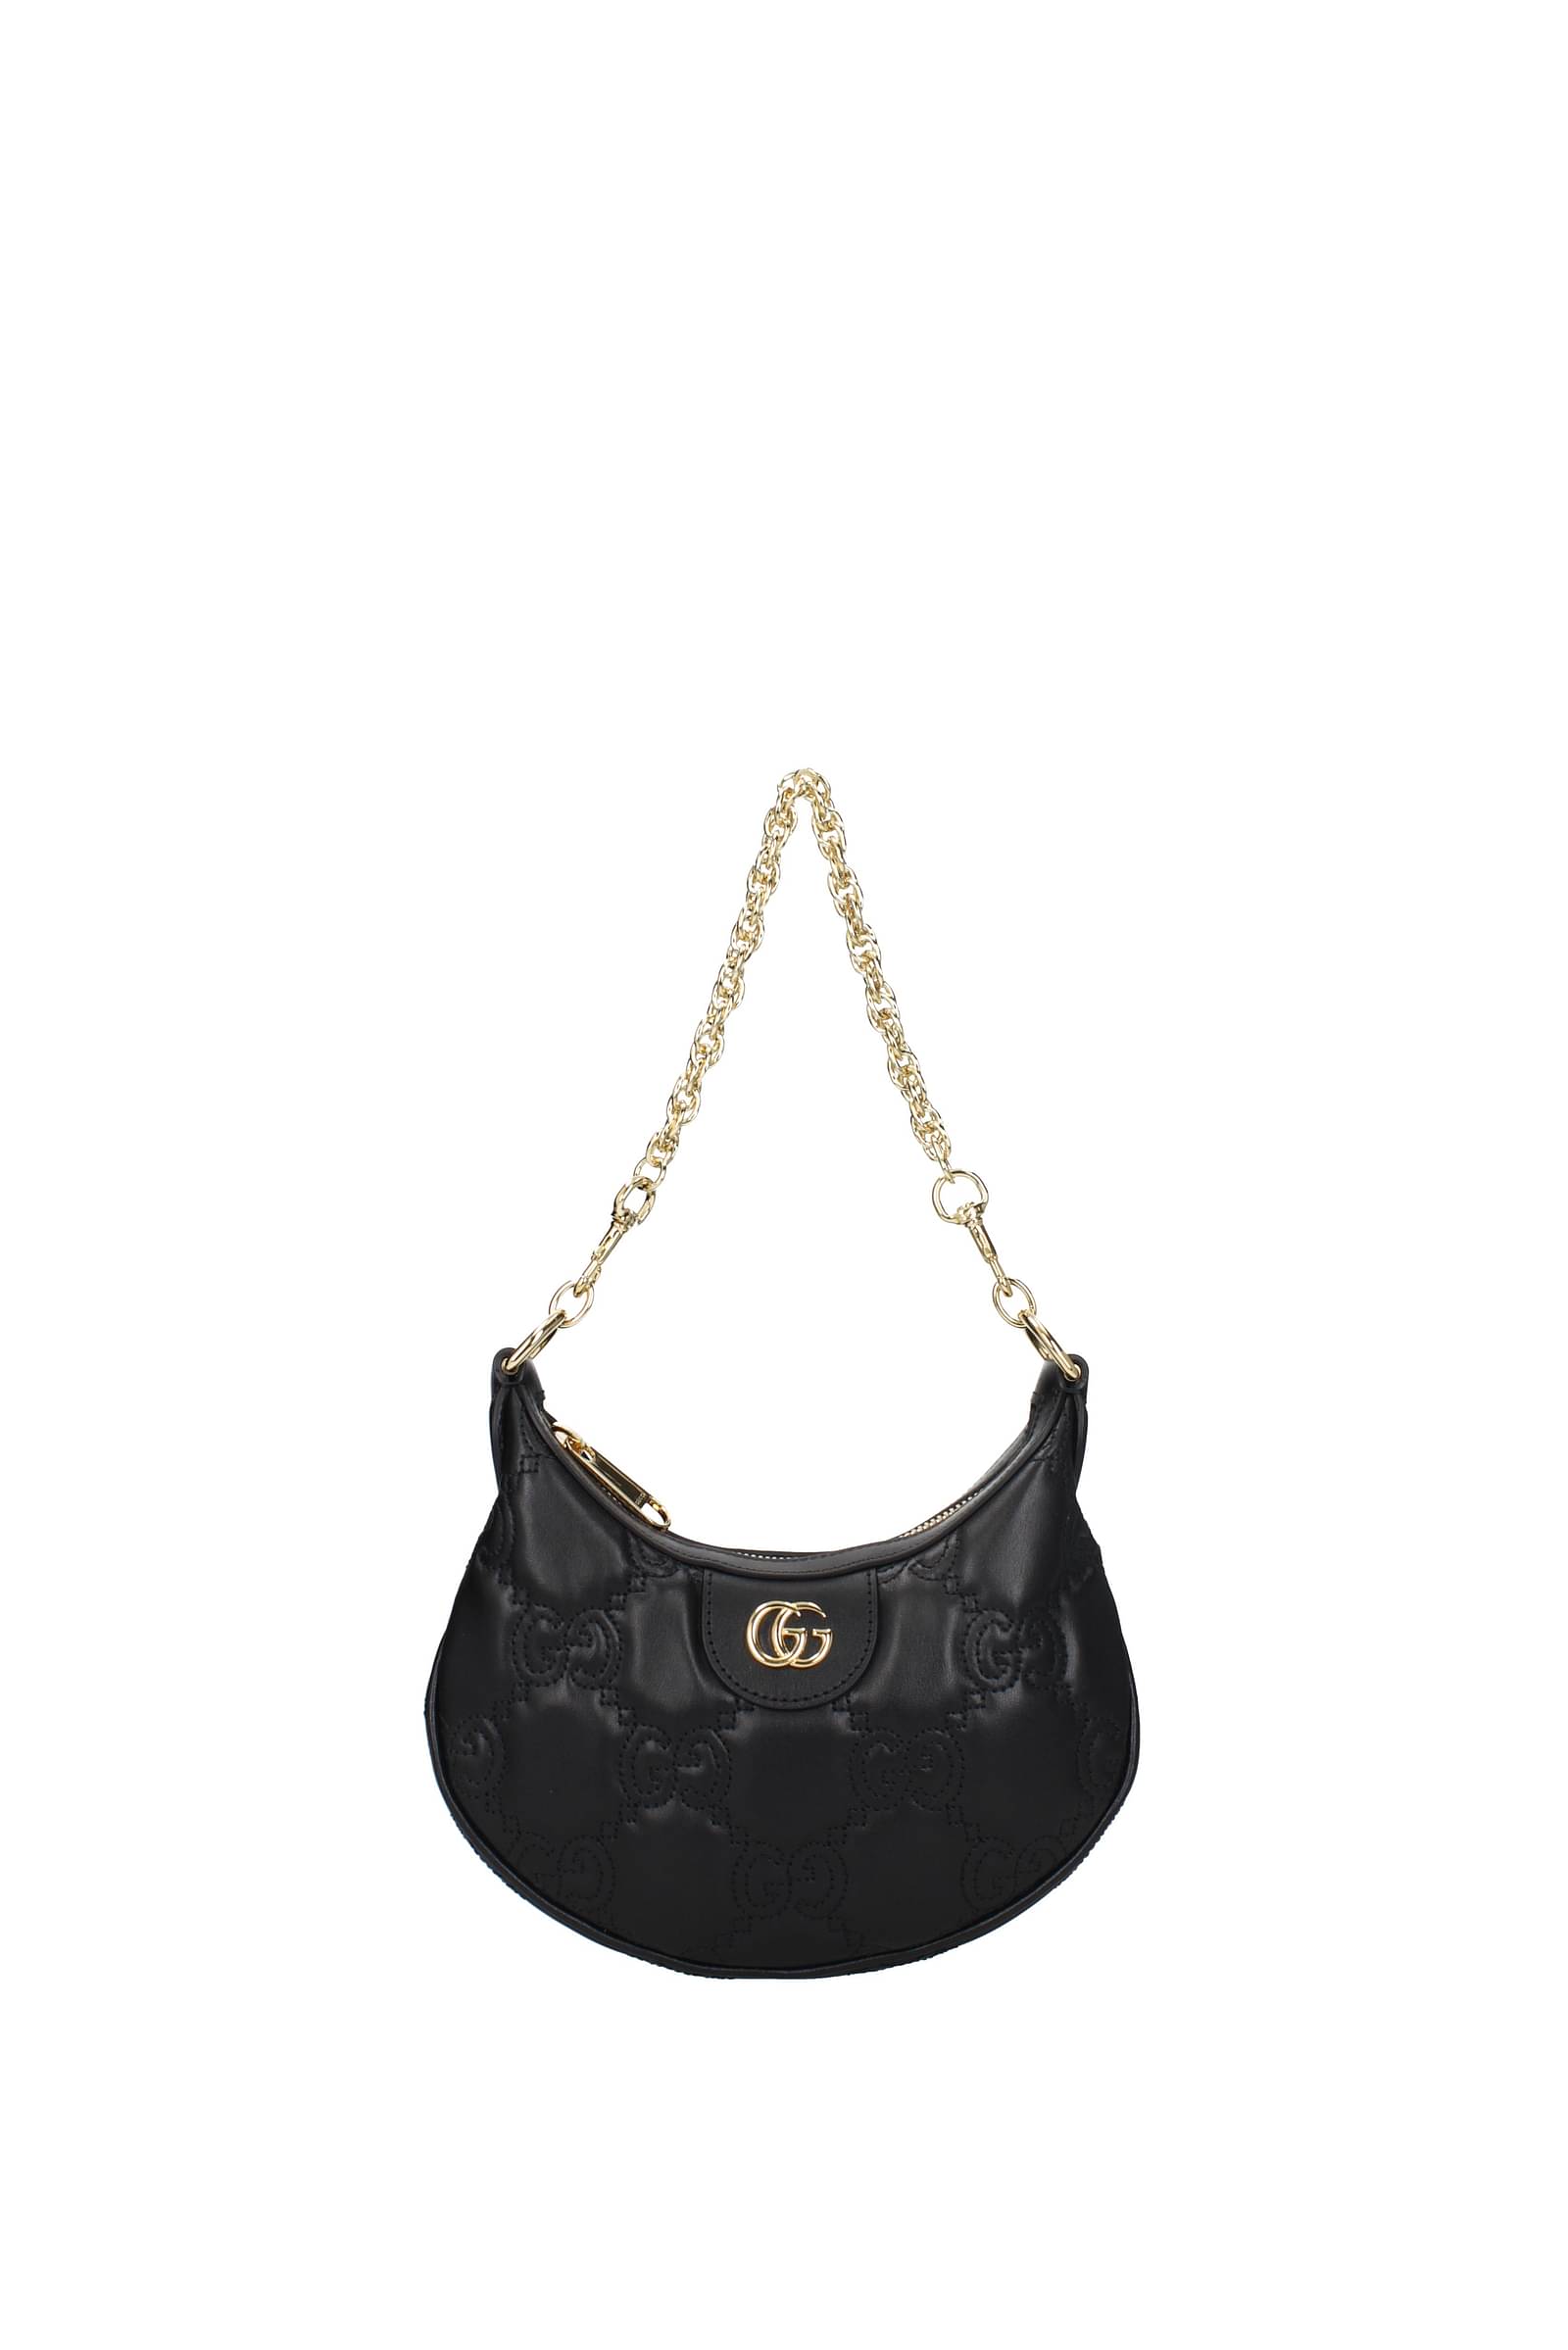 outlet online discounted Gucci Bag Framed Wall Art Decor Print |  www.firstsaveholdings.com